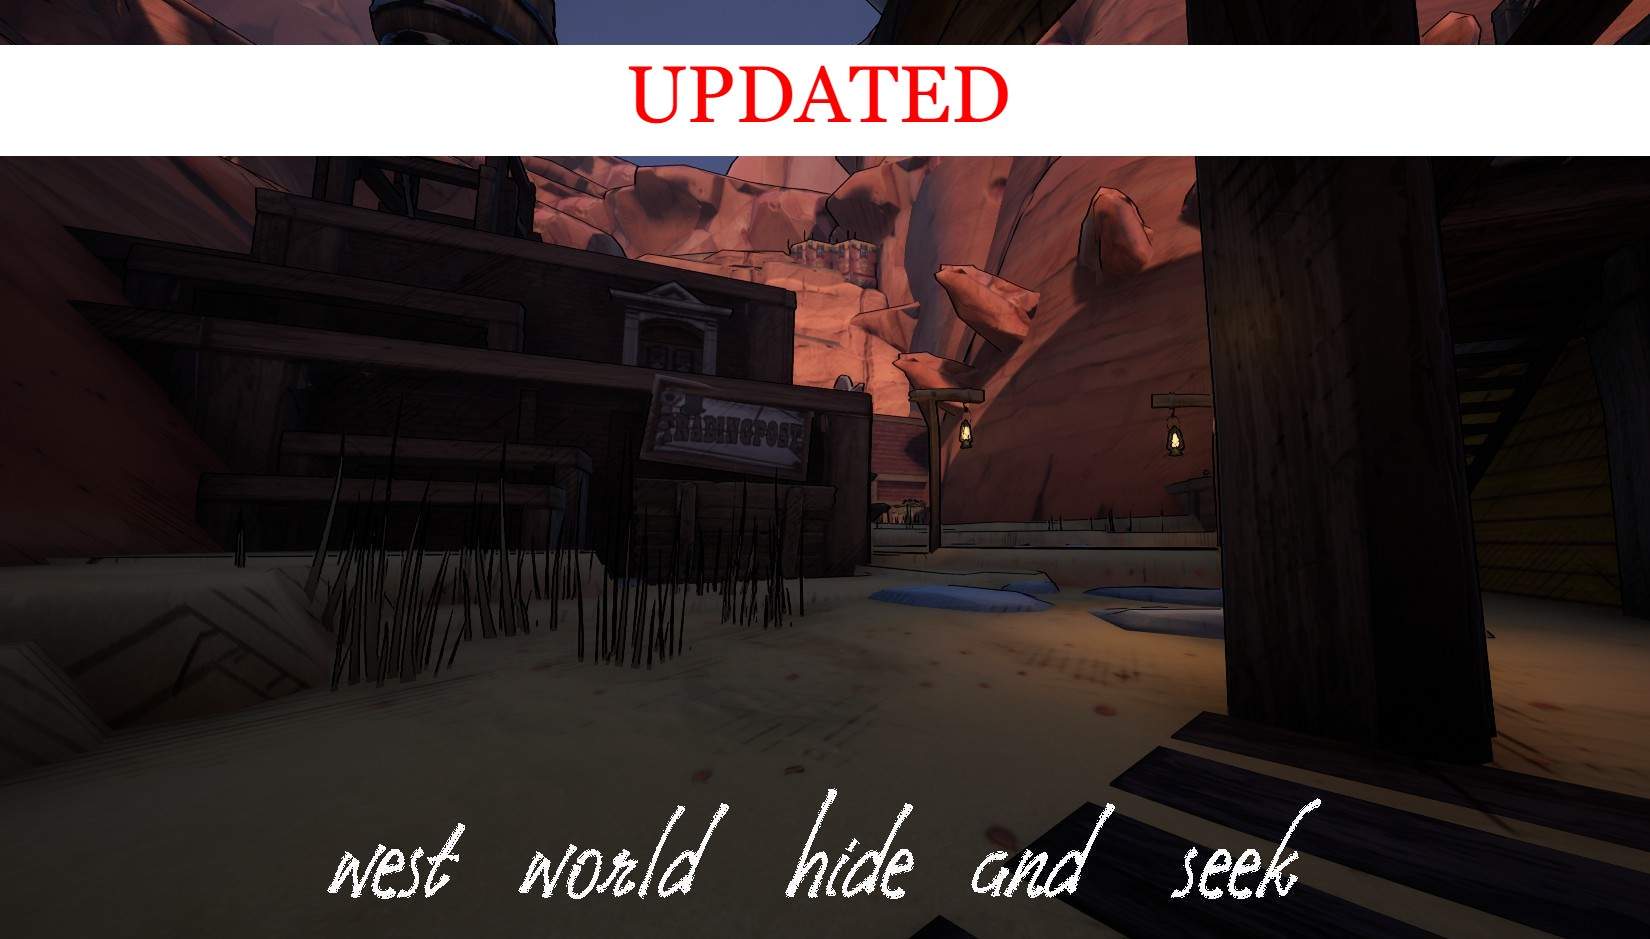 WEST WORLD HIDE AND SEEK (UPDATED)